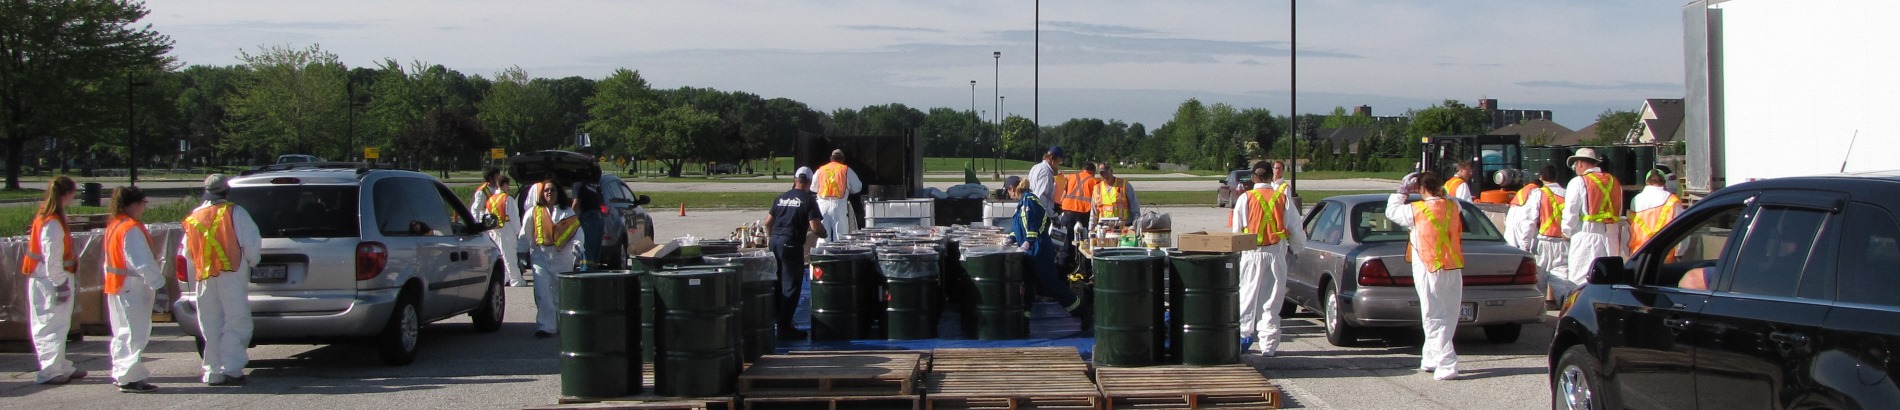 Residents dropping off items at mobile household hazardous waste depot